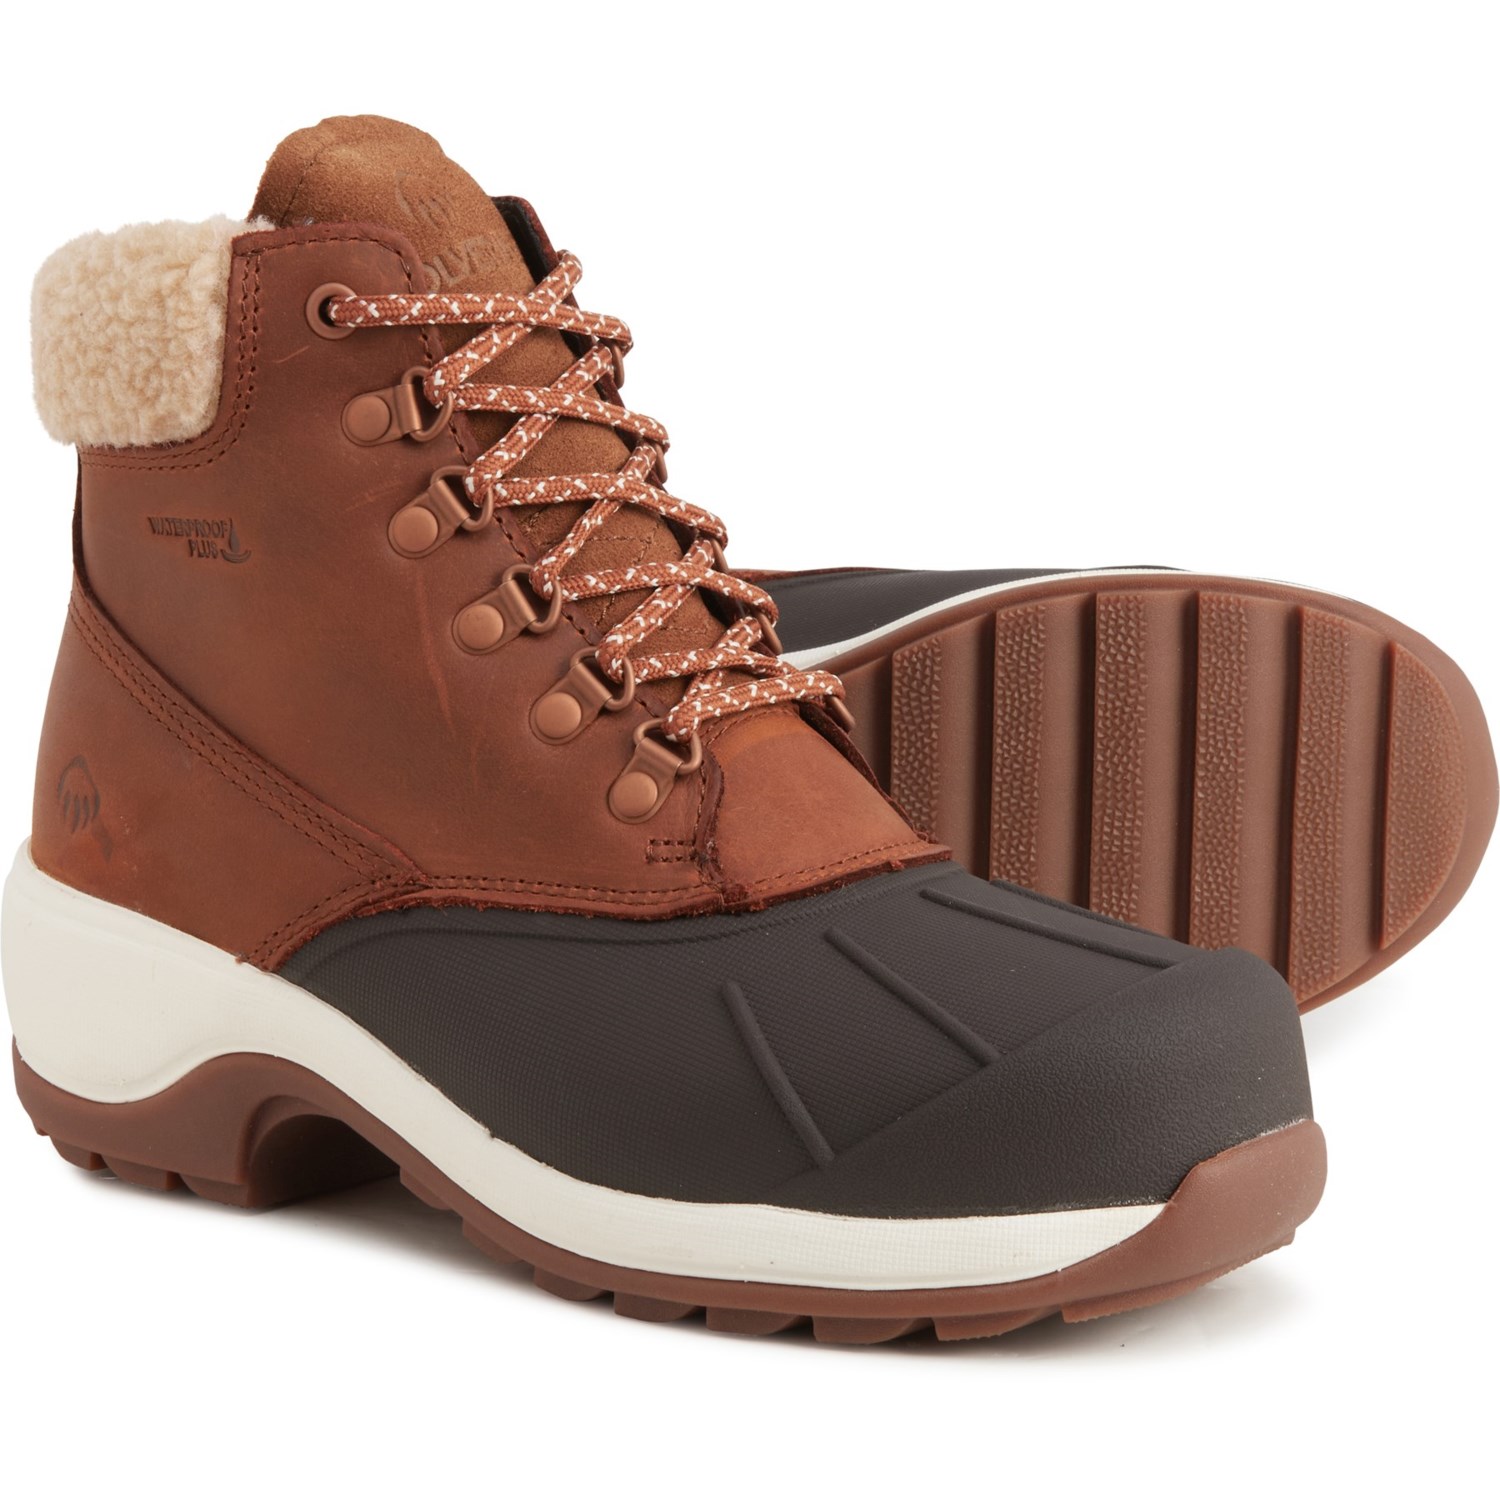 Jacket Time series roller Wolverine Frost Winter Boots (For Women) - Save 64%